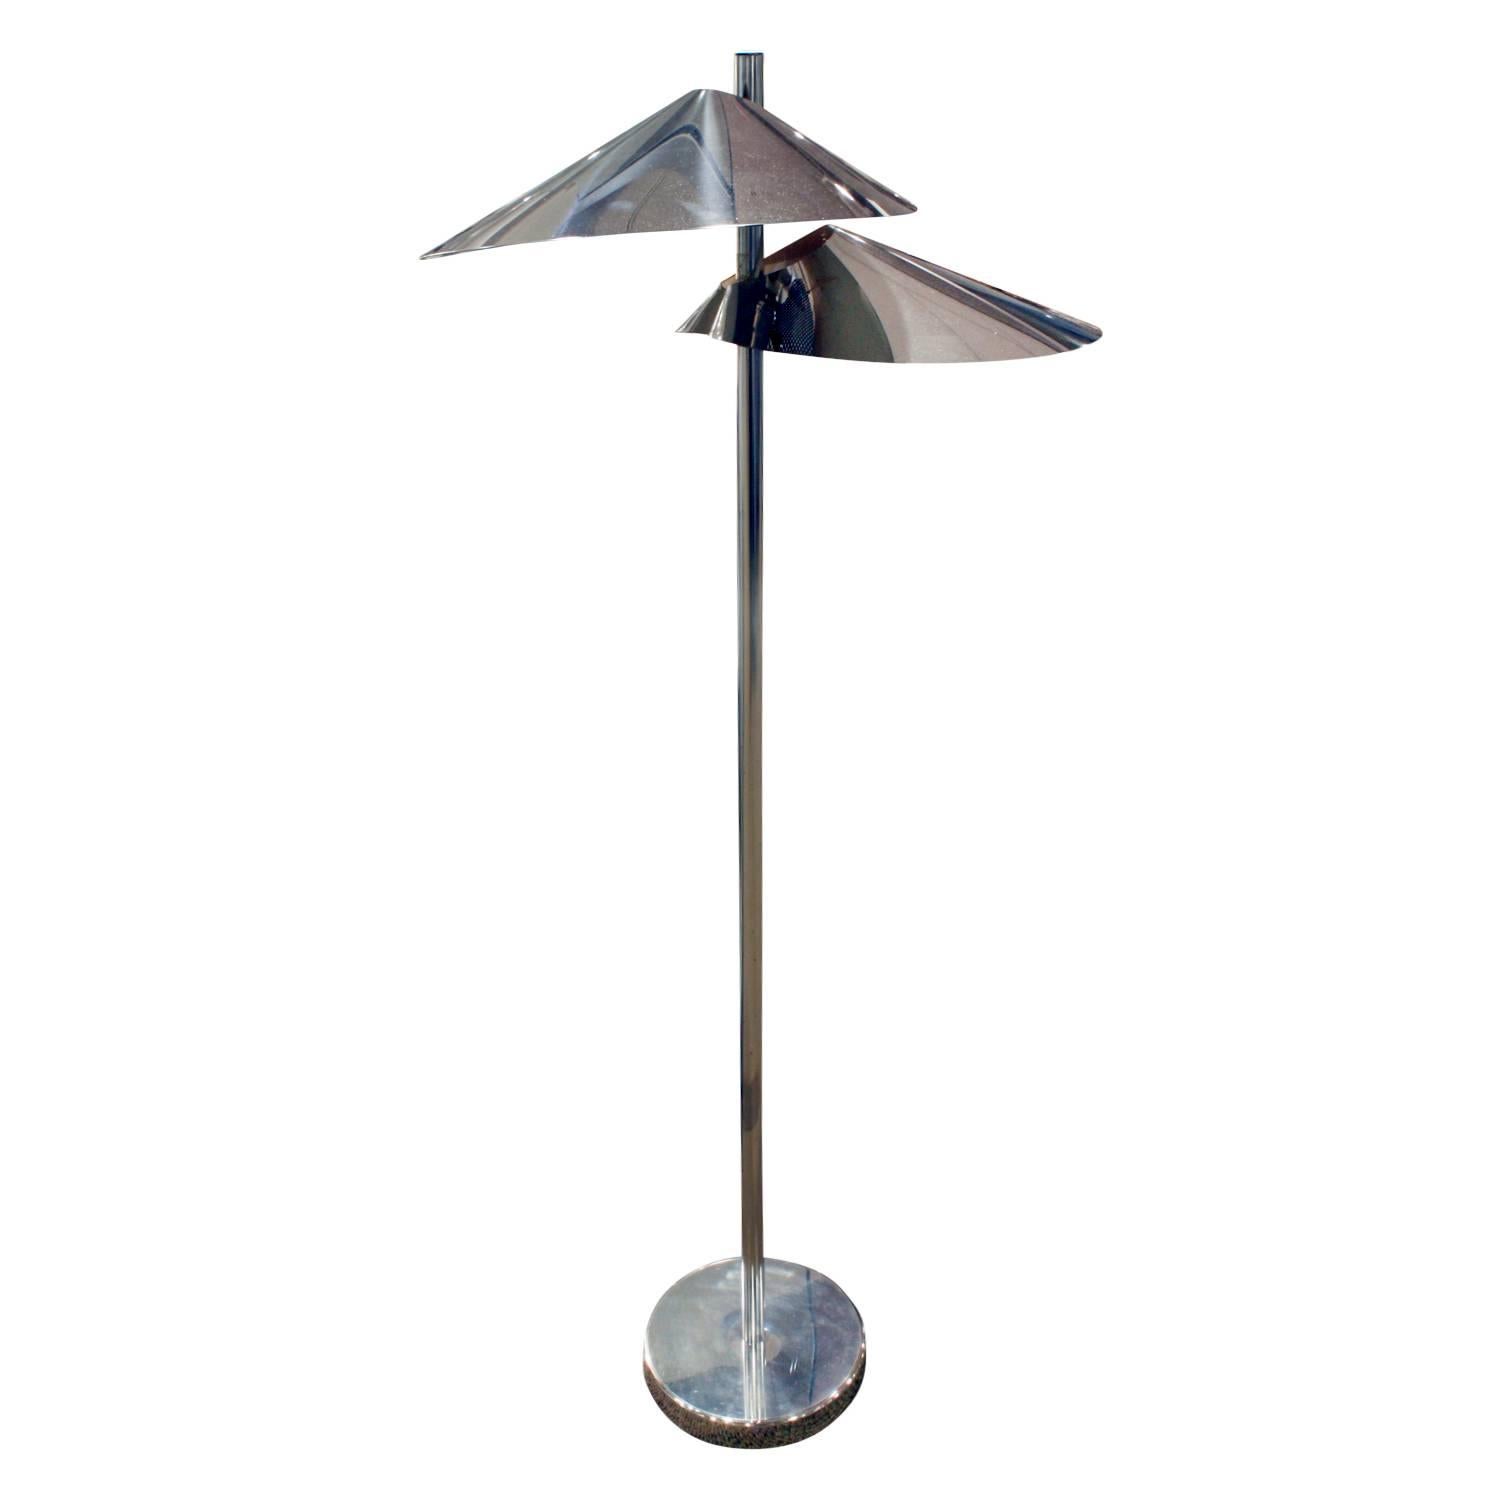 Curtis Jere "Lily Pad" Chrome Floor Lamp, 1960s